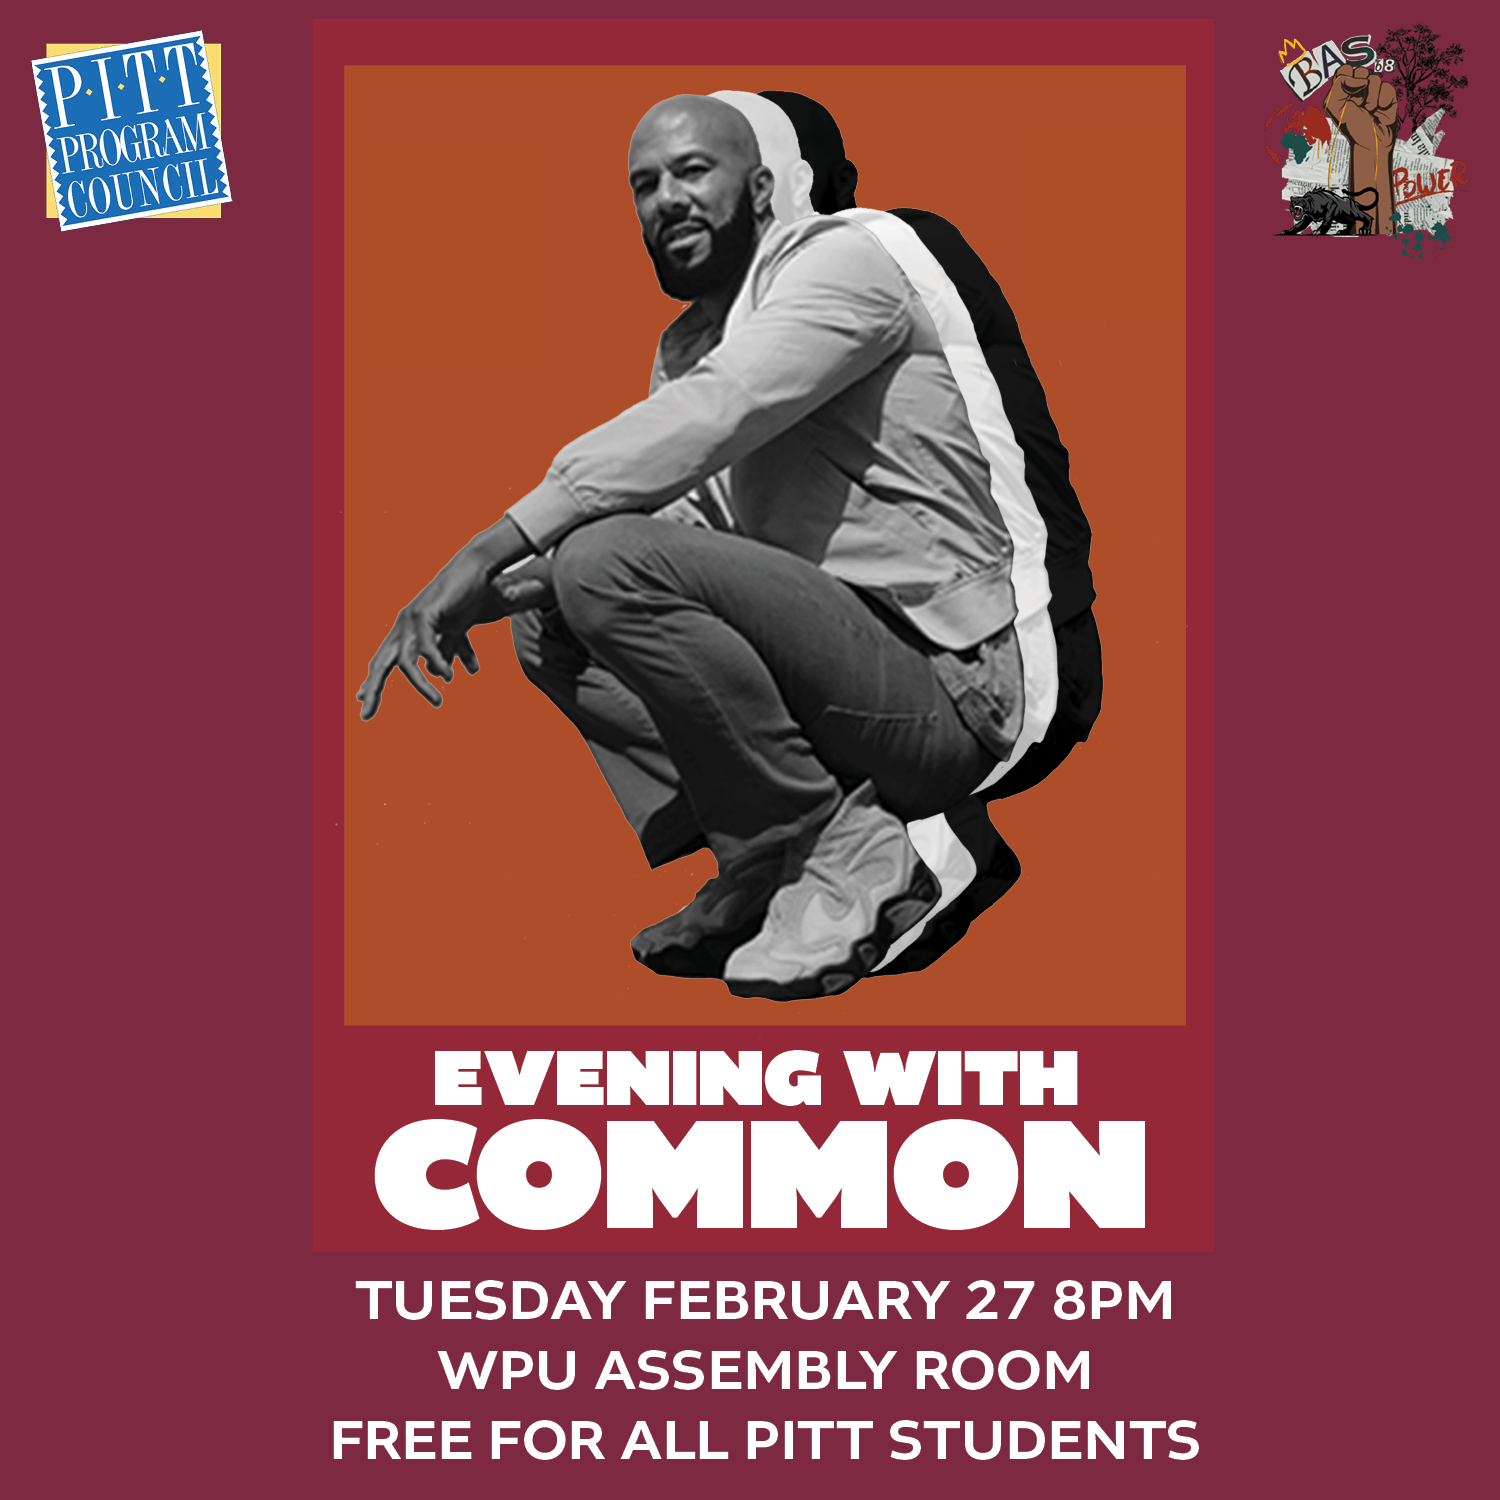 An Evening with Common